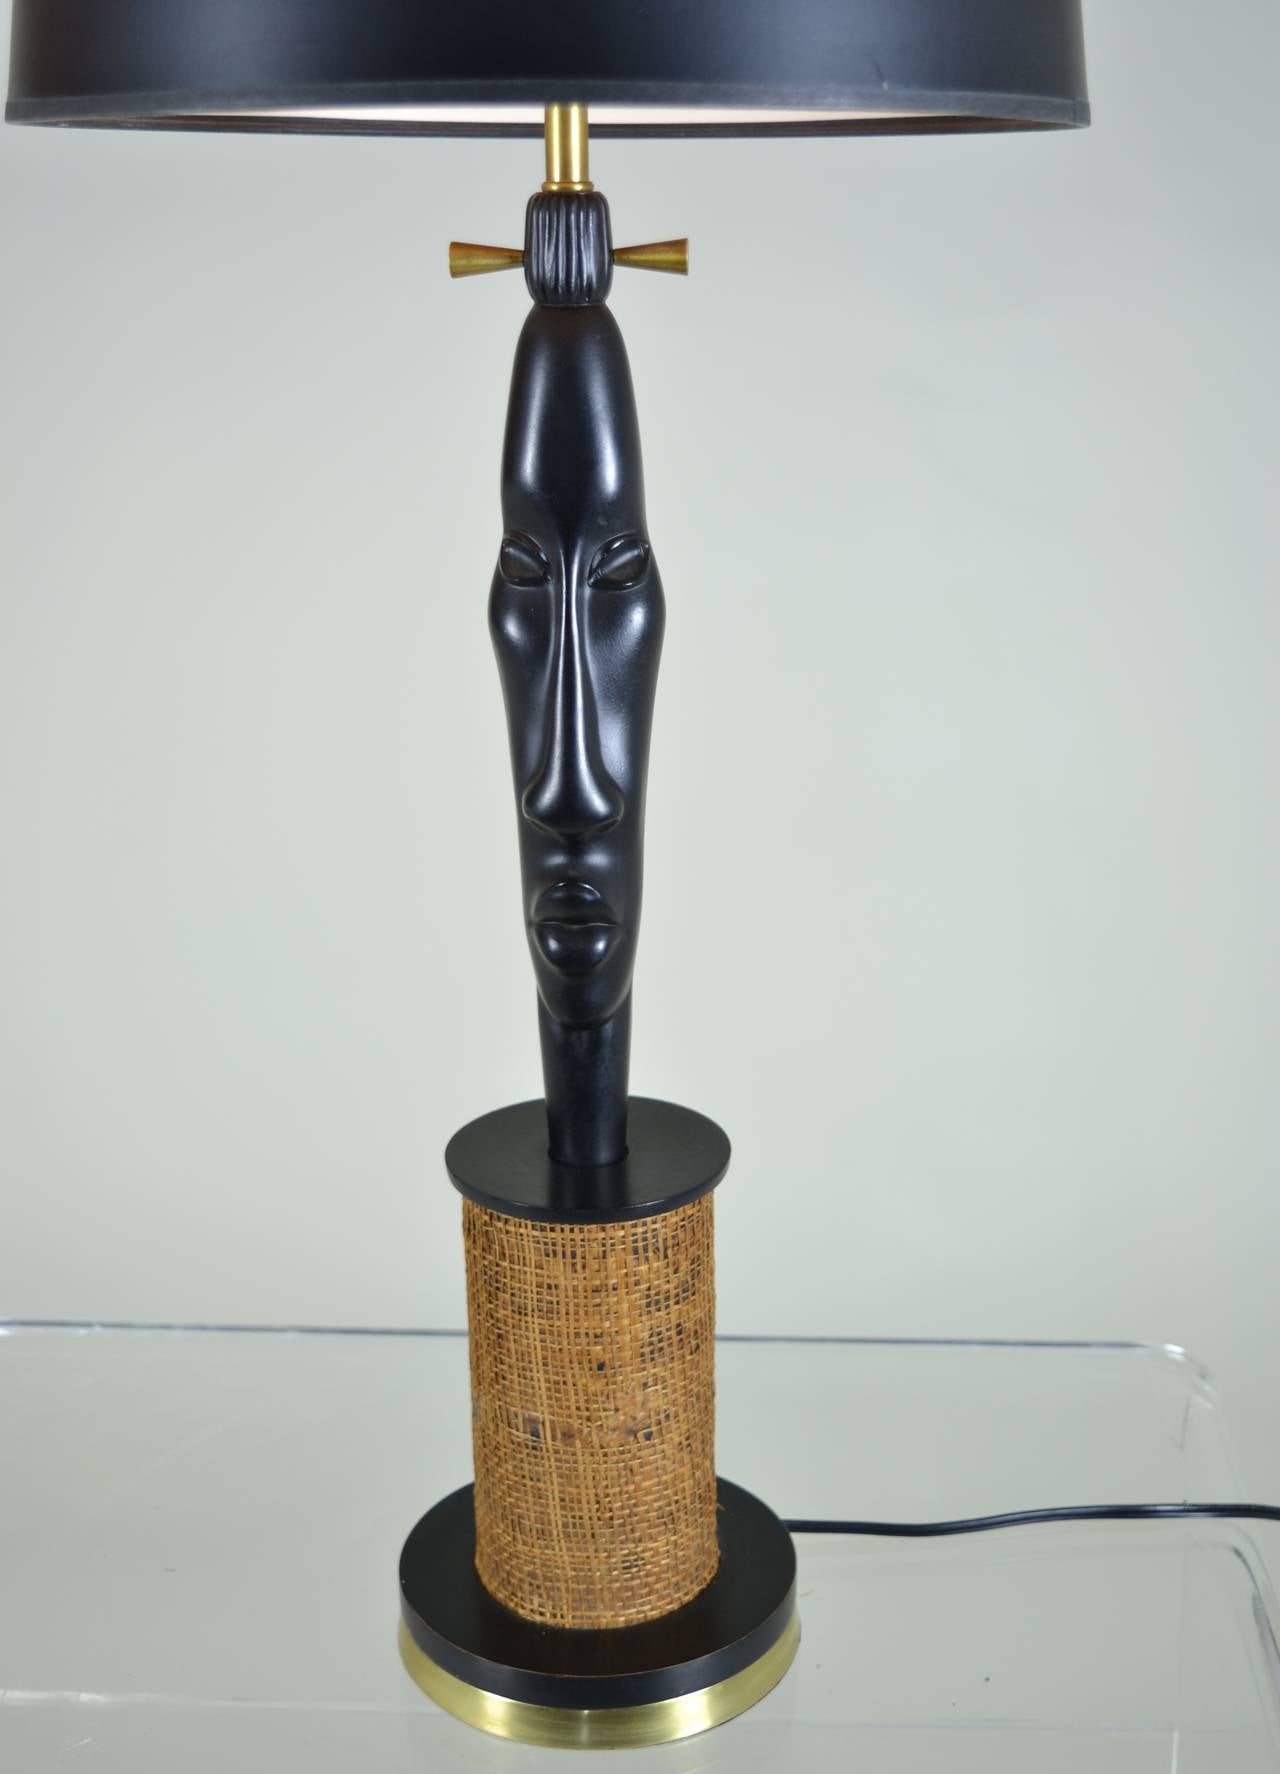 Sculptural lamp with African inspired carving. Super quality, black and brass base with grass cloth cover and brass details. All new wiring. Height to top of final w/harp shown: 30.75; 25.5 to top of socket.